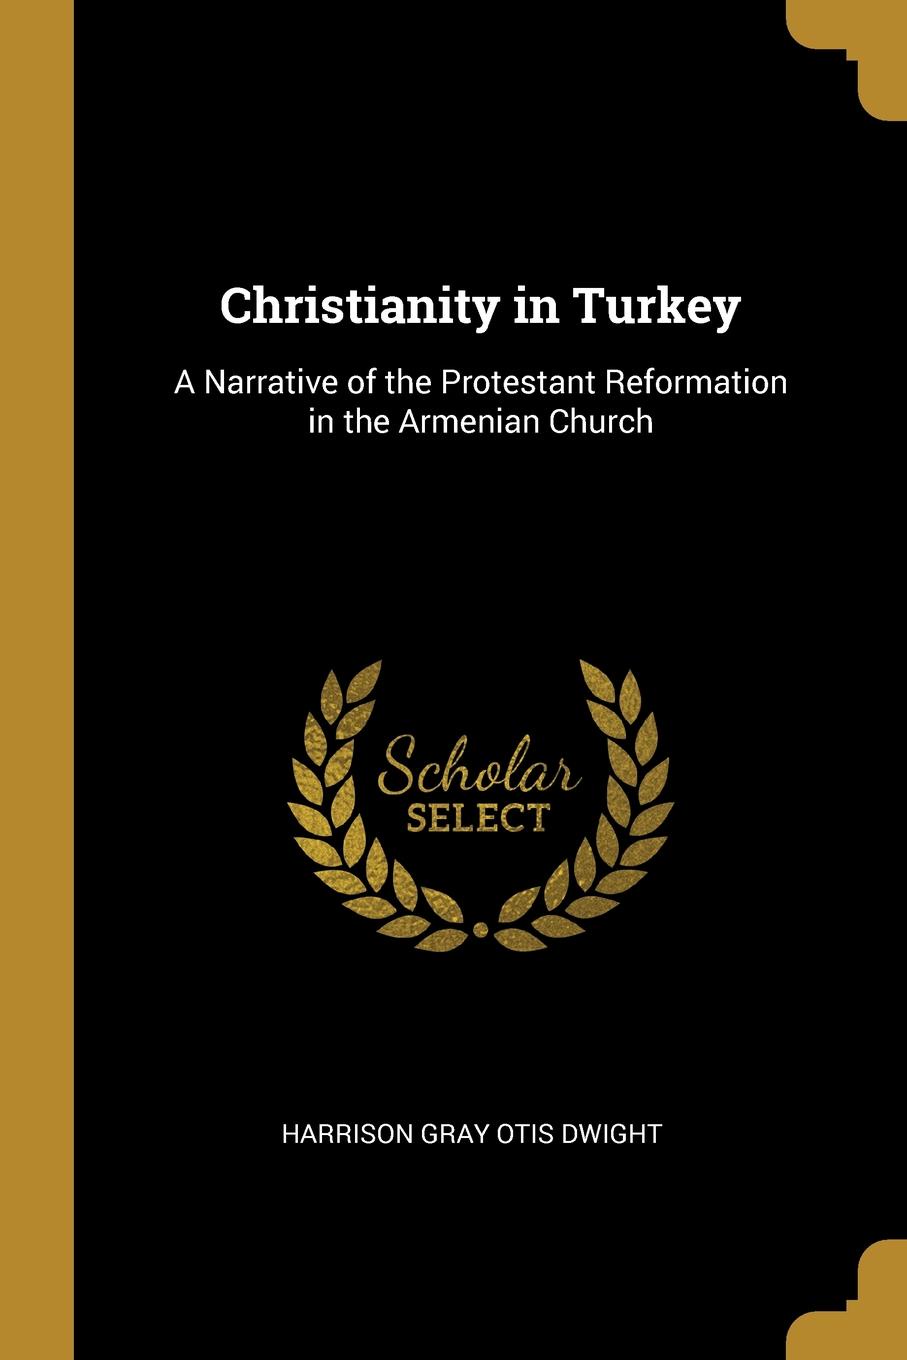 Christianity in Turkey. A Narrative of the Protestant Reformation in the Armenian Church